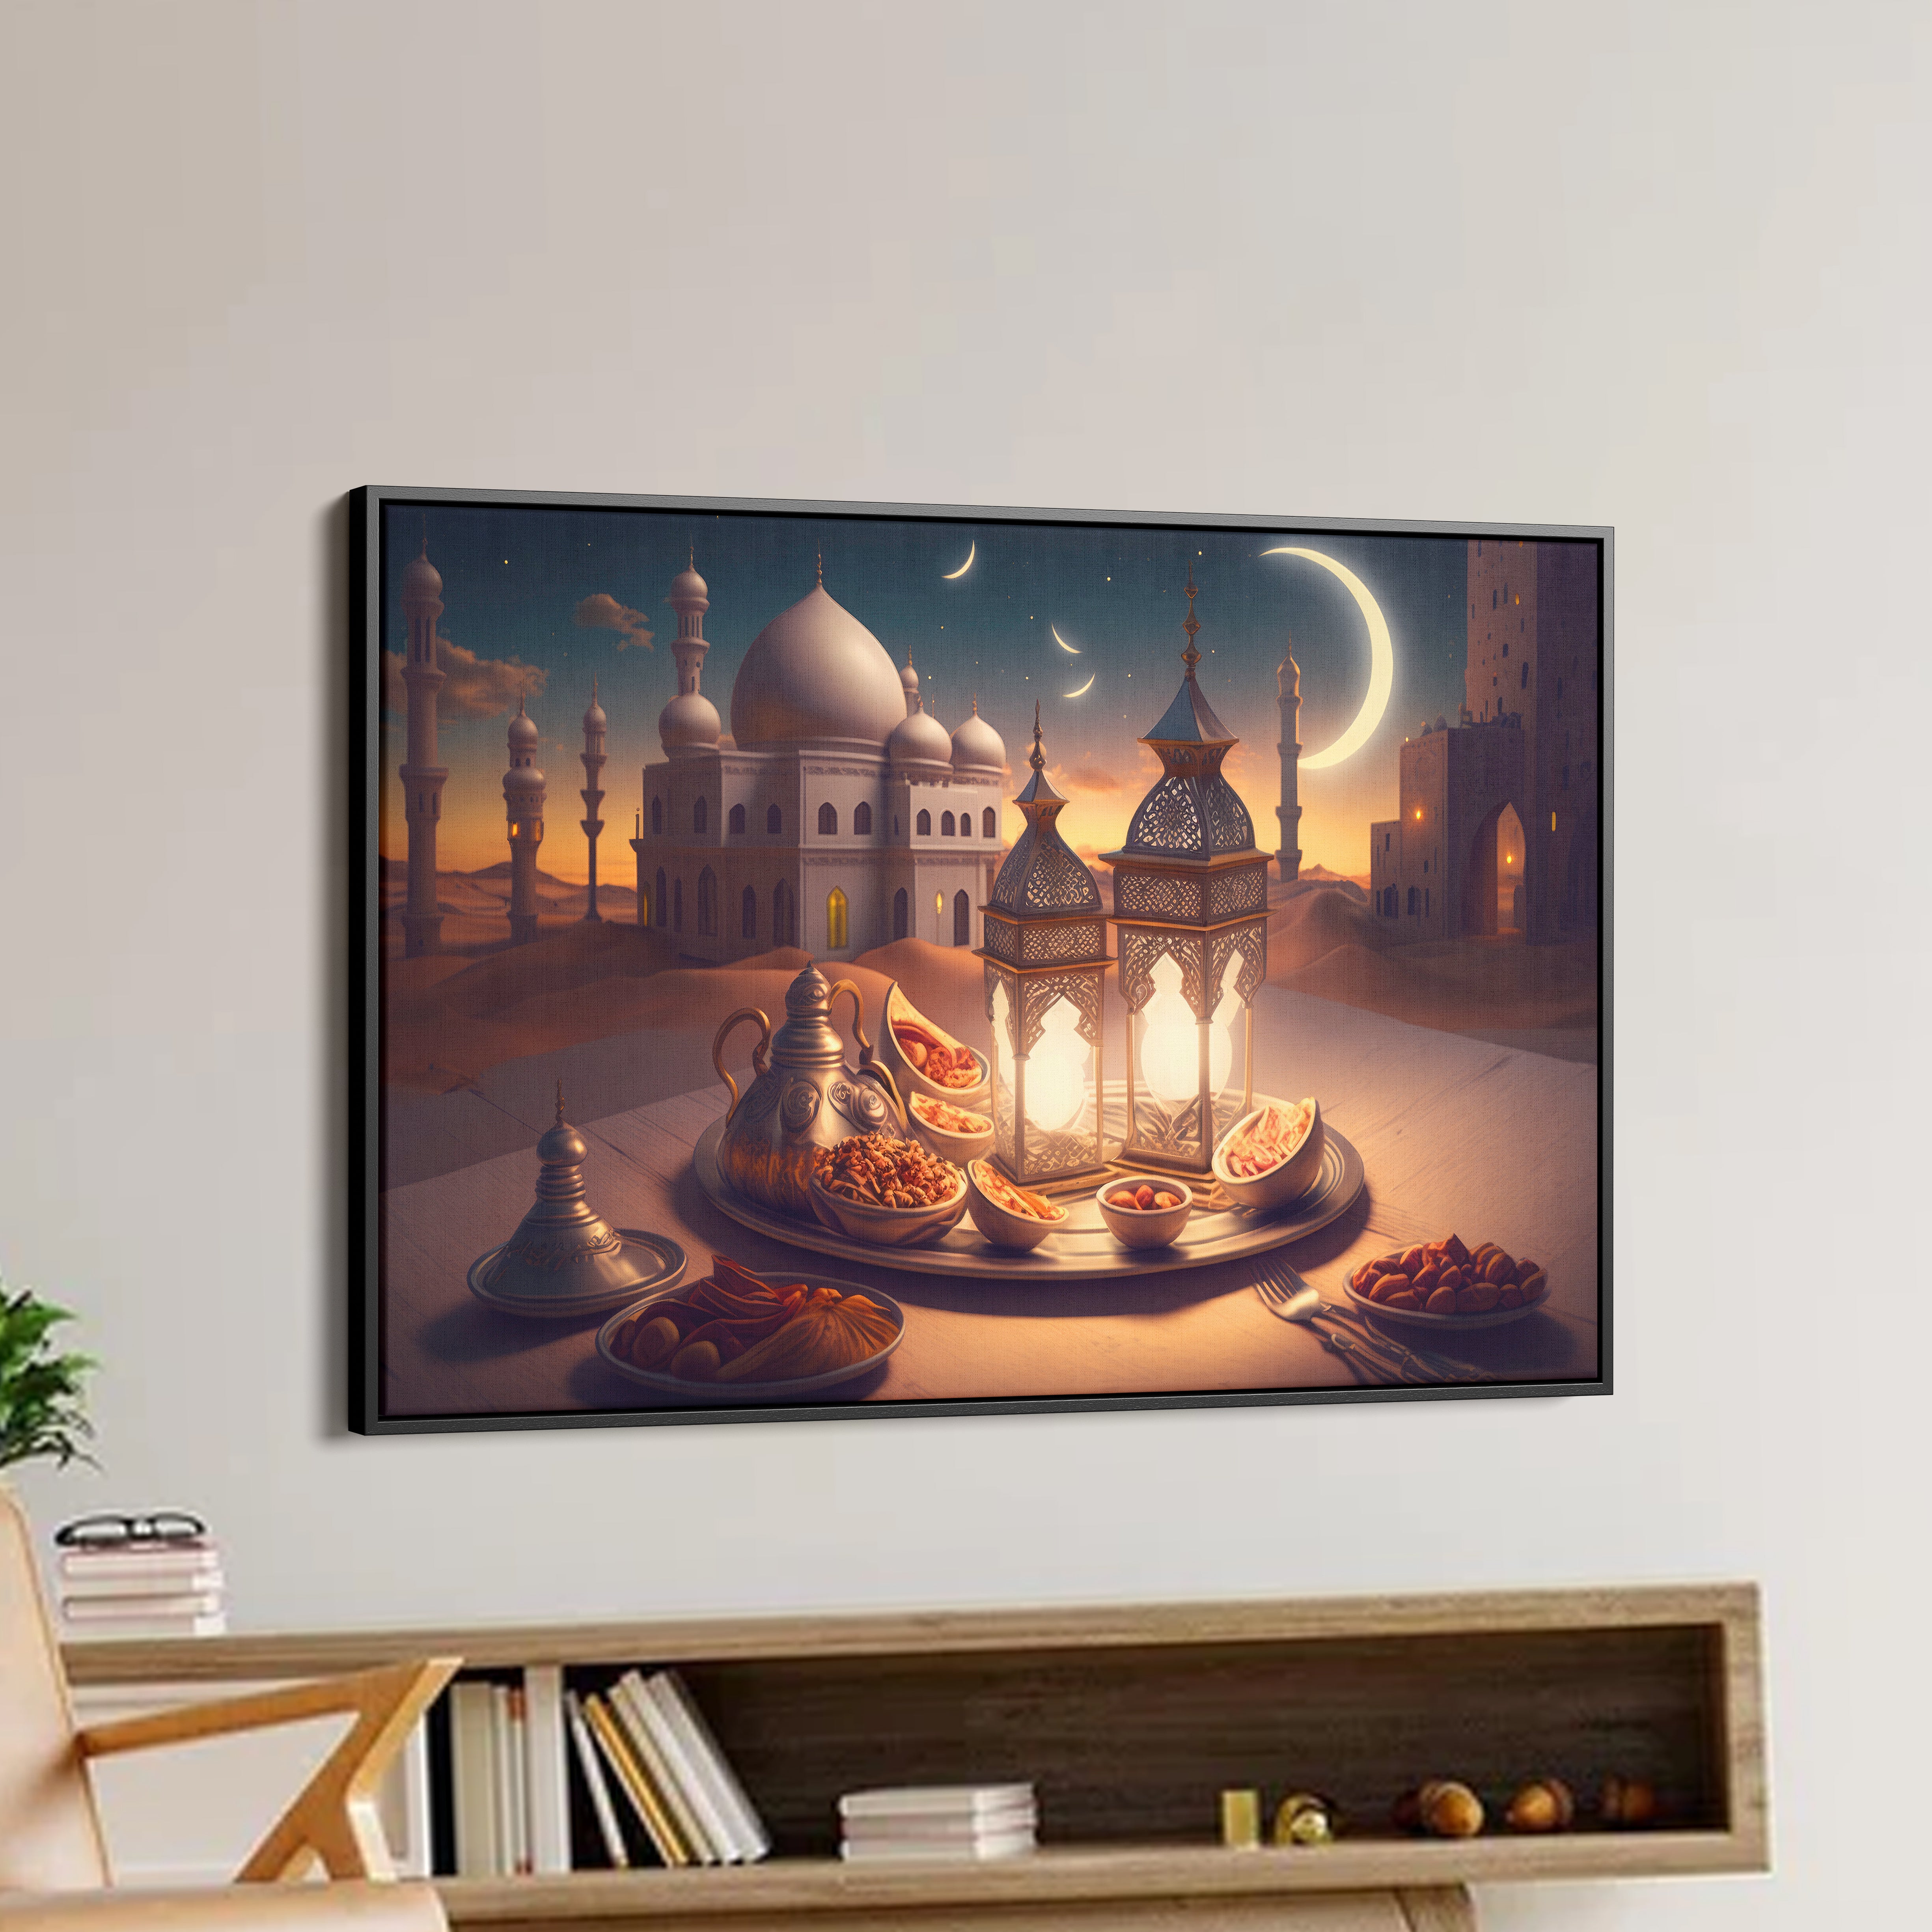 Ramadan And Eid Element Canvas Wall Painting